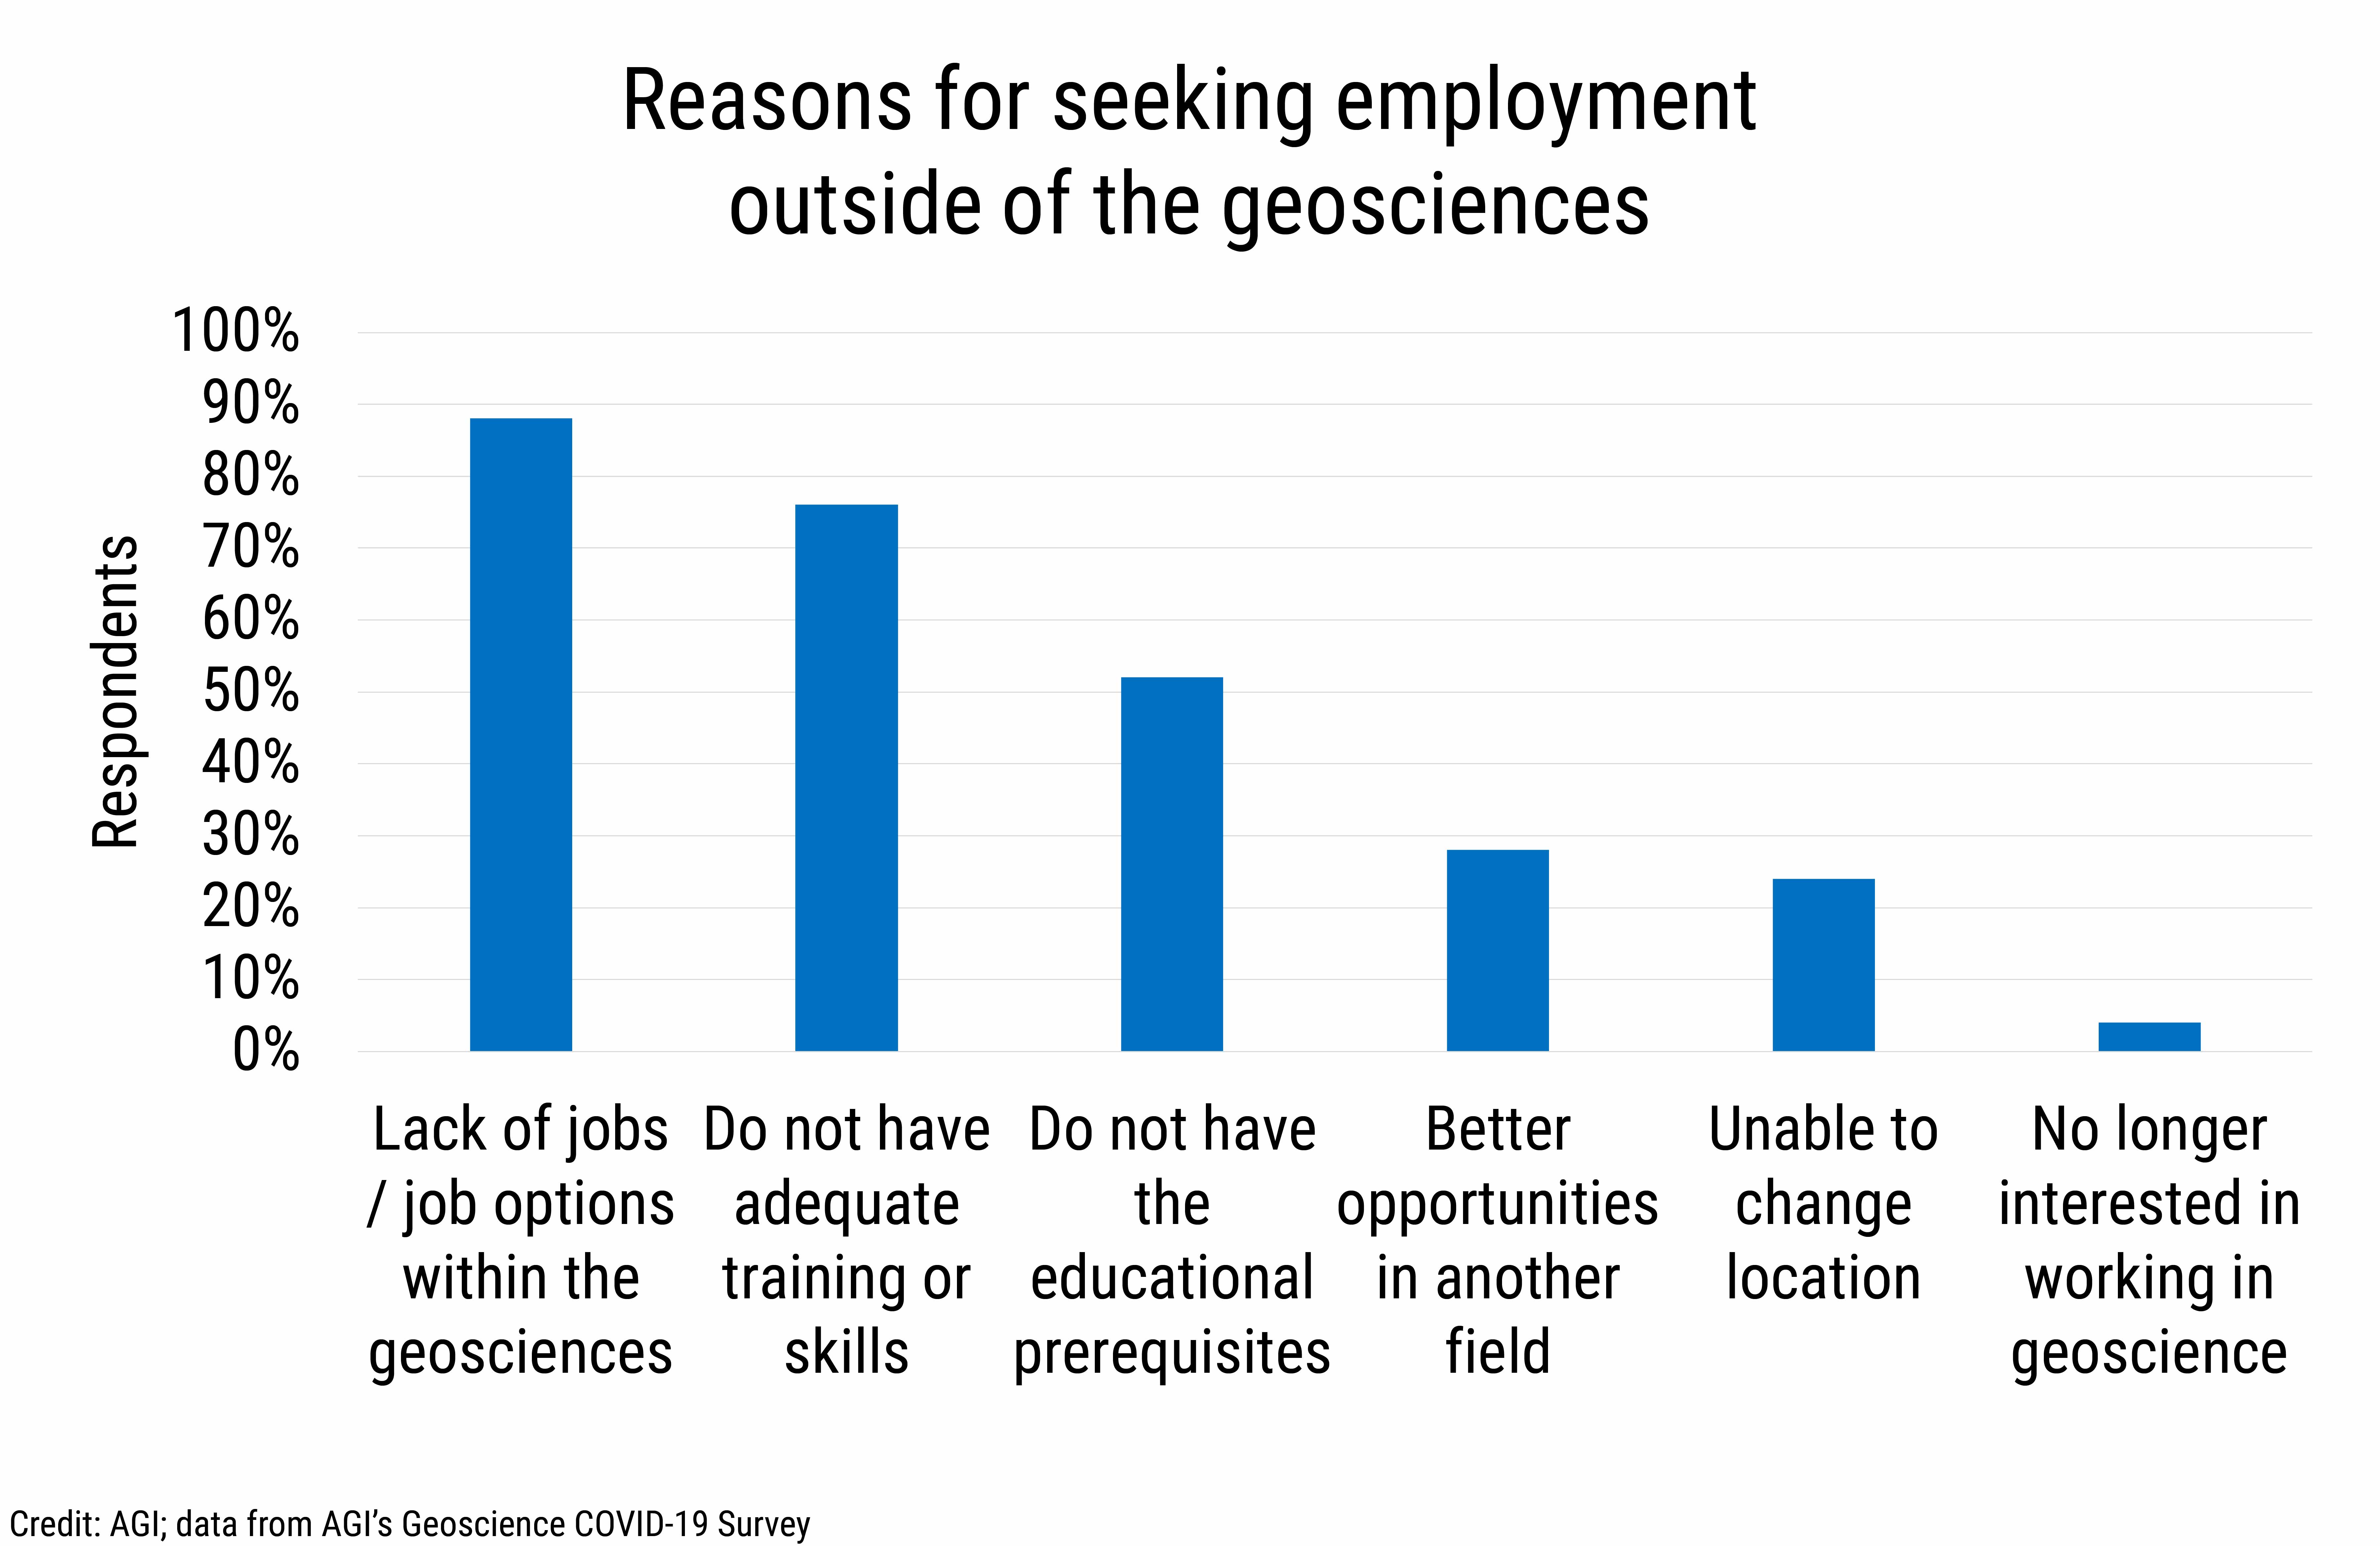 DB_2020-019 chart 06: Reasons for seeking employment outside of the geosciences (credit: AGI; data from AGI’s Geoscience COVID-19 Survey)